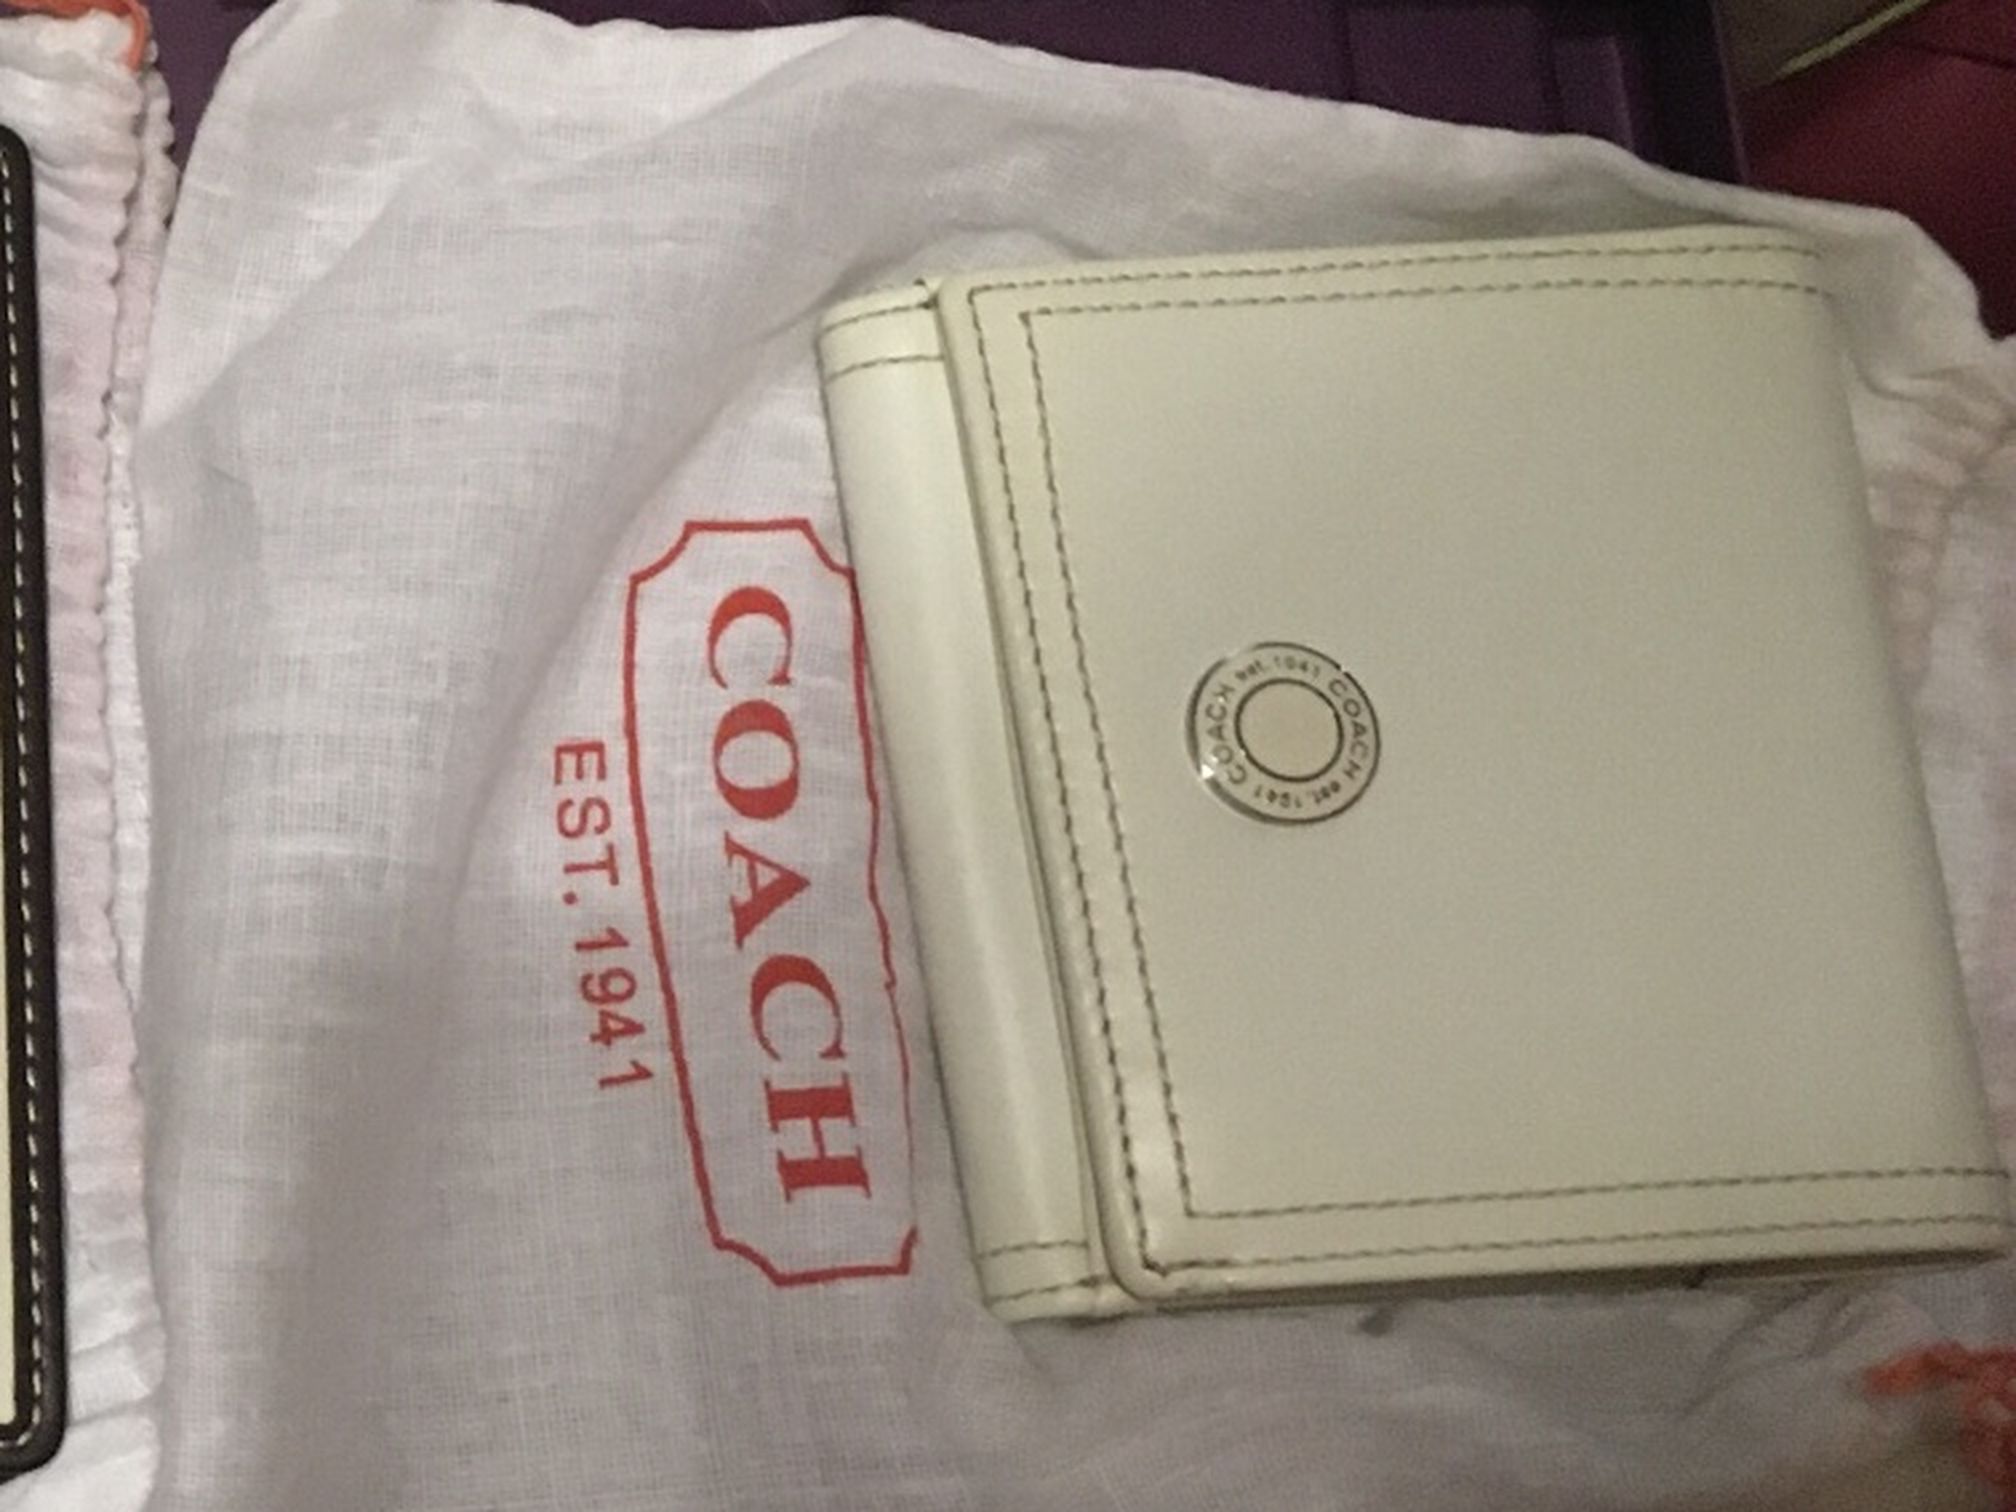 New Beautiful Genuine Smooth White Leather Coach Wallet w/ Slight Blemish (Selling 1 Only For $25!!)